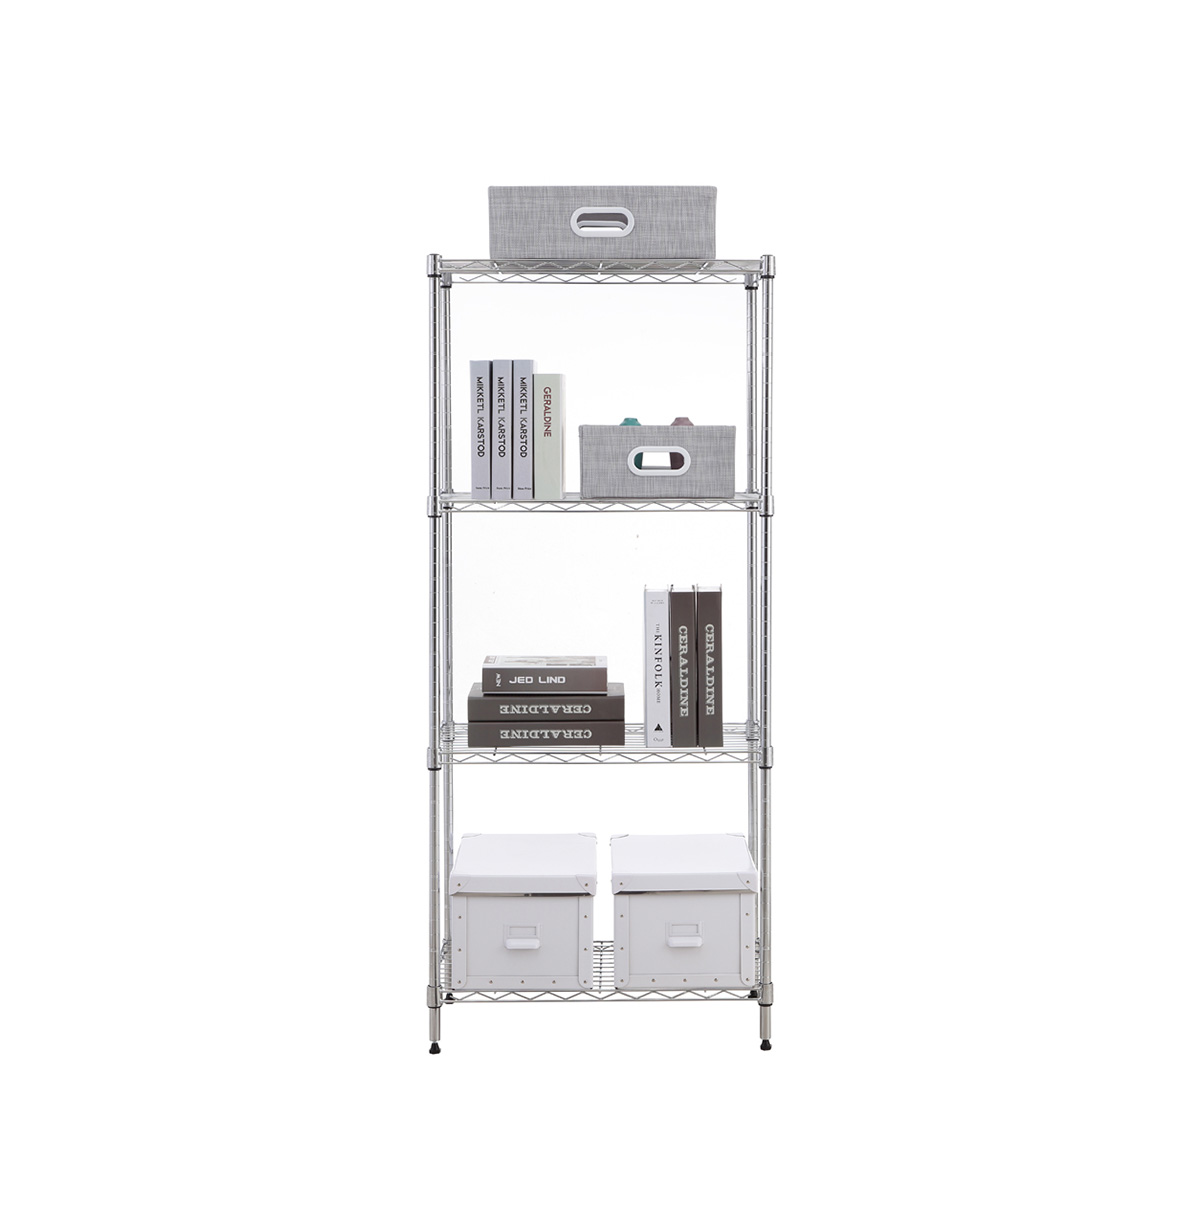 MZG Steel Storage Shelving 4-Tier Wide, Chrome